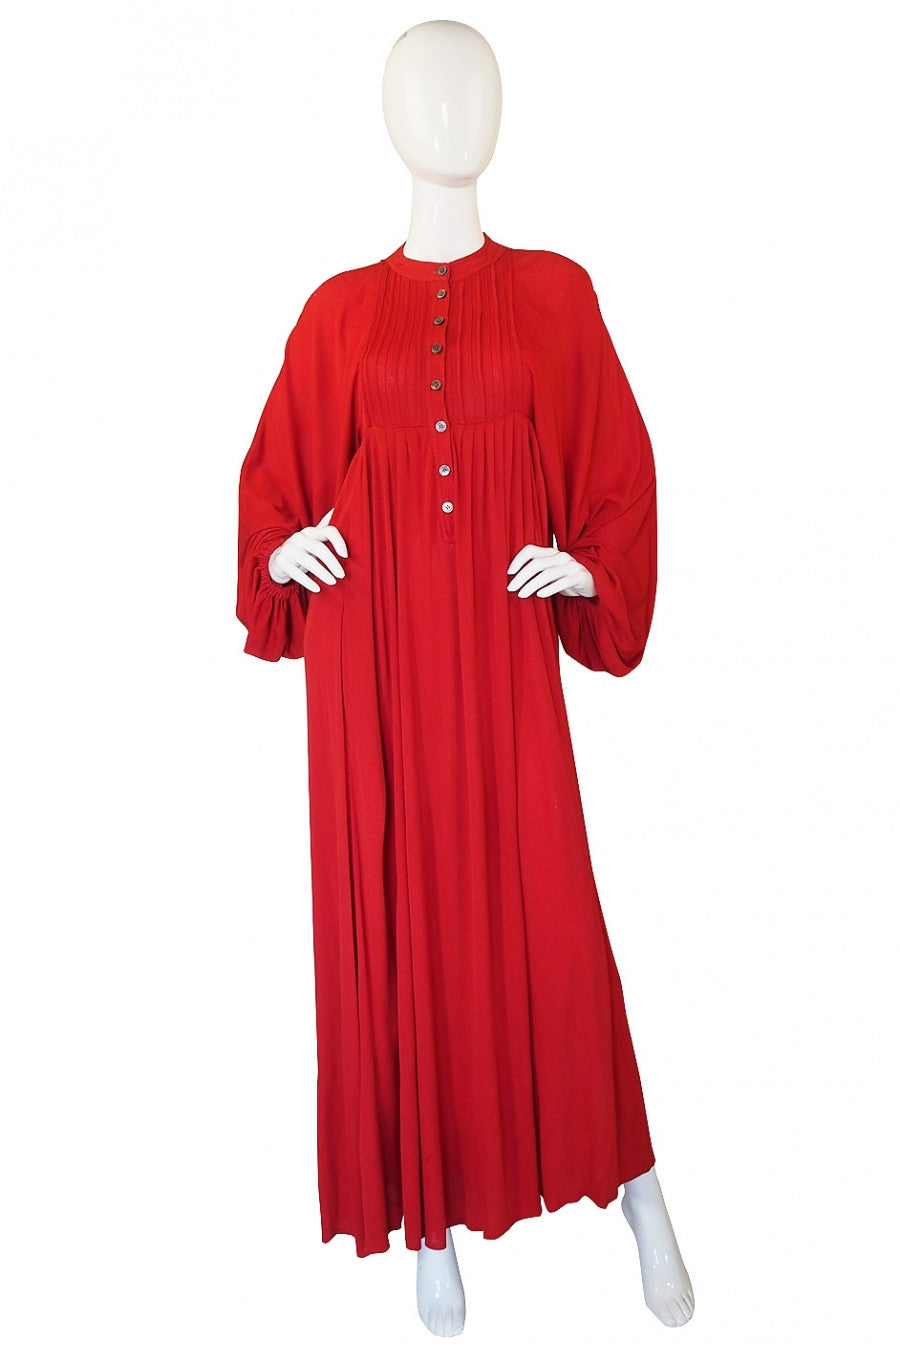 1971 Documented Jean Muir Gown – Shrimpton Couture